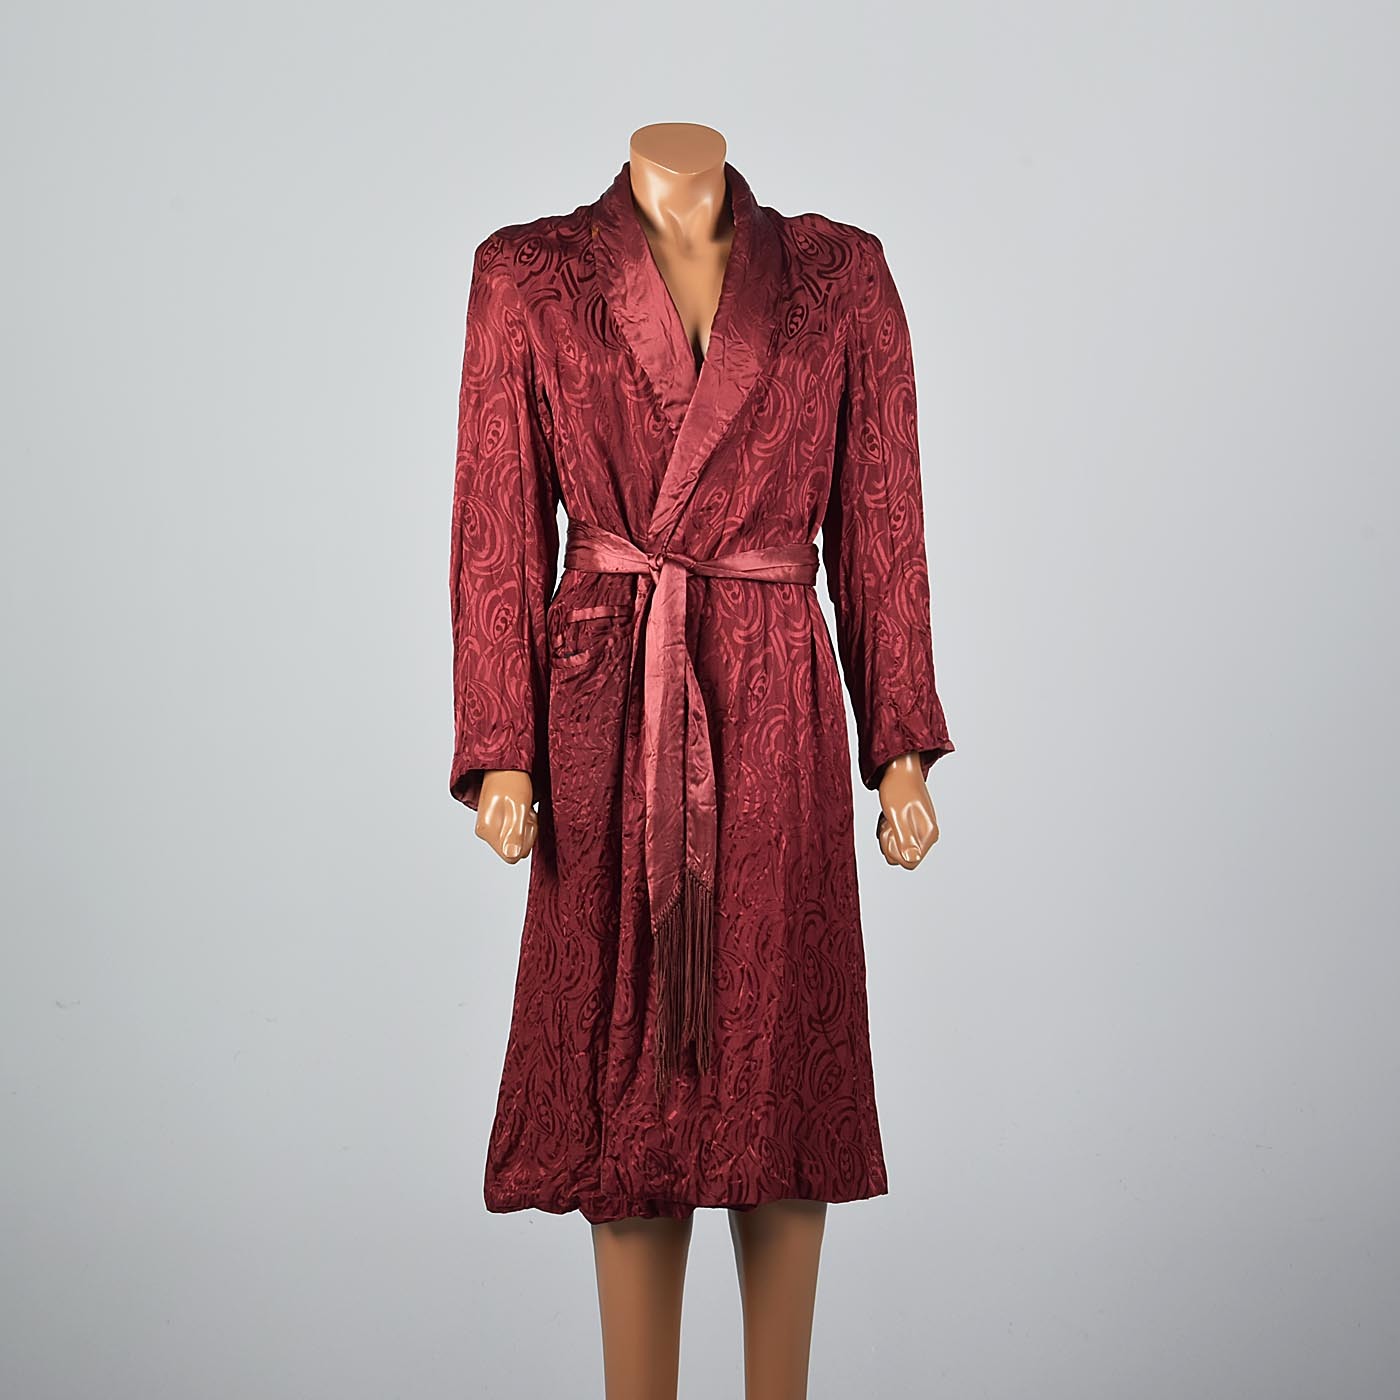 1950s Men's Rayon Red Swirl Brocade Robe with Fringe